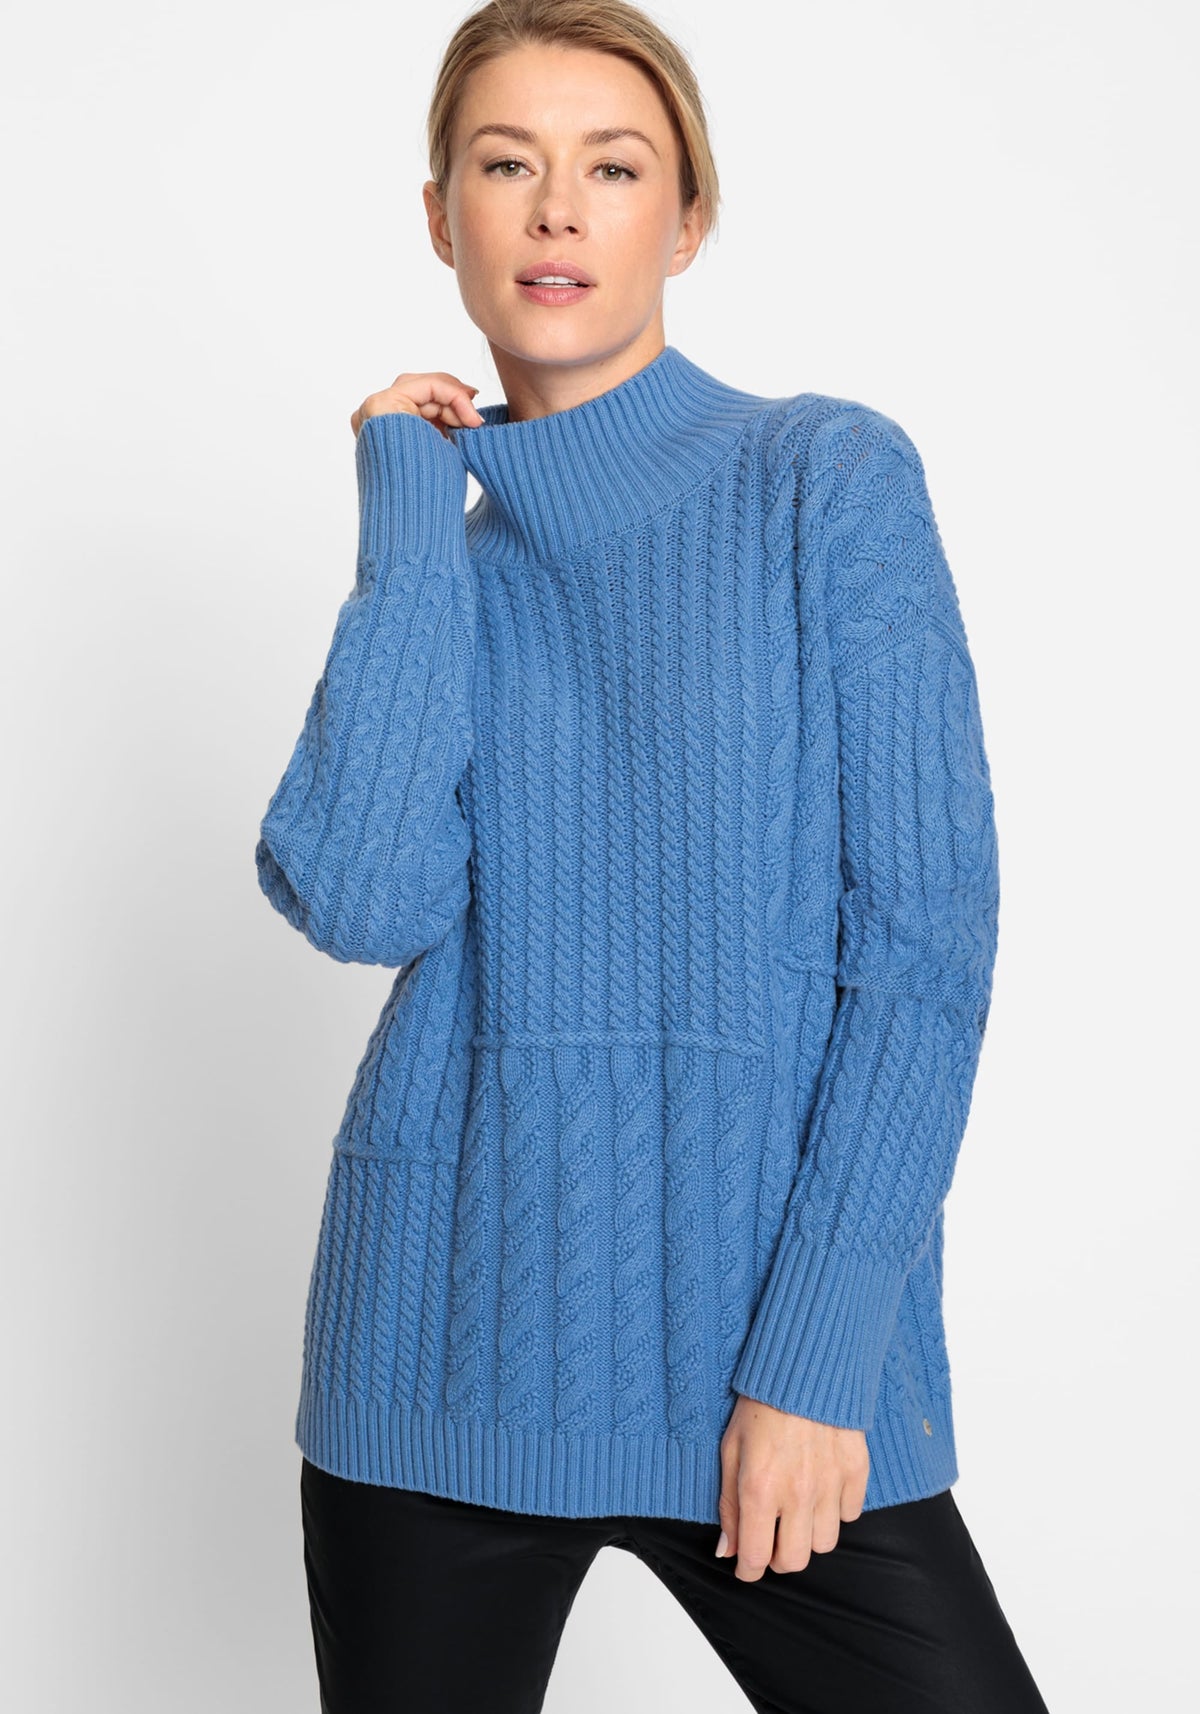 Long Sleeve Cotton Blend Multi-Cable Knit Sweater